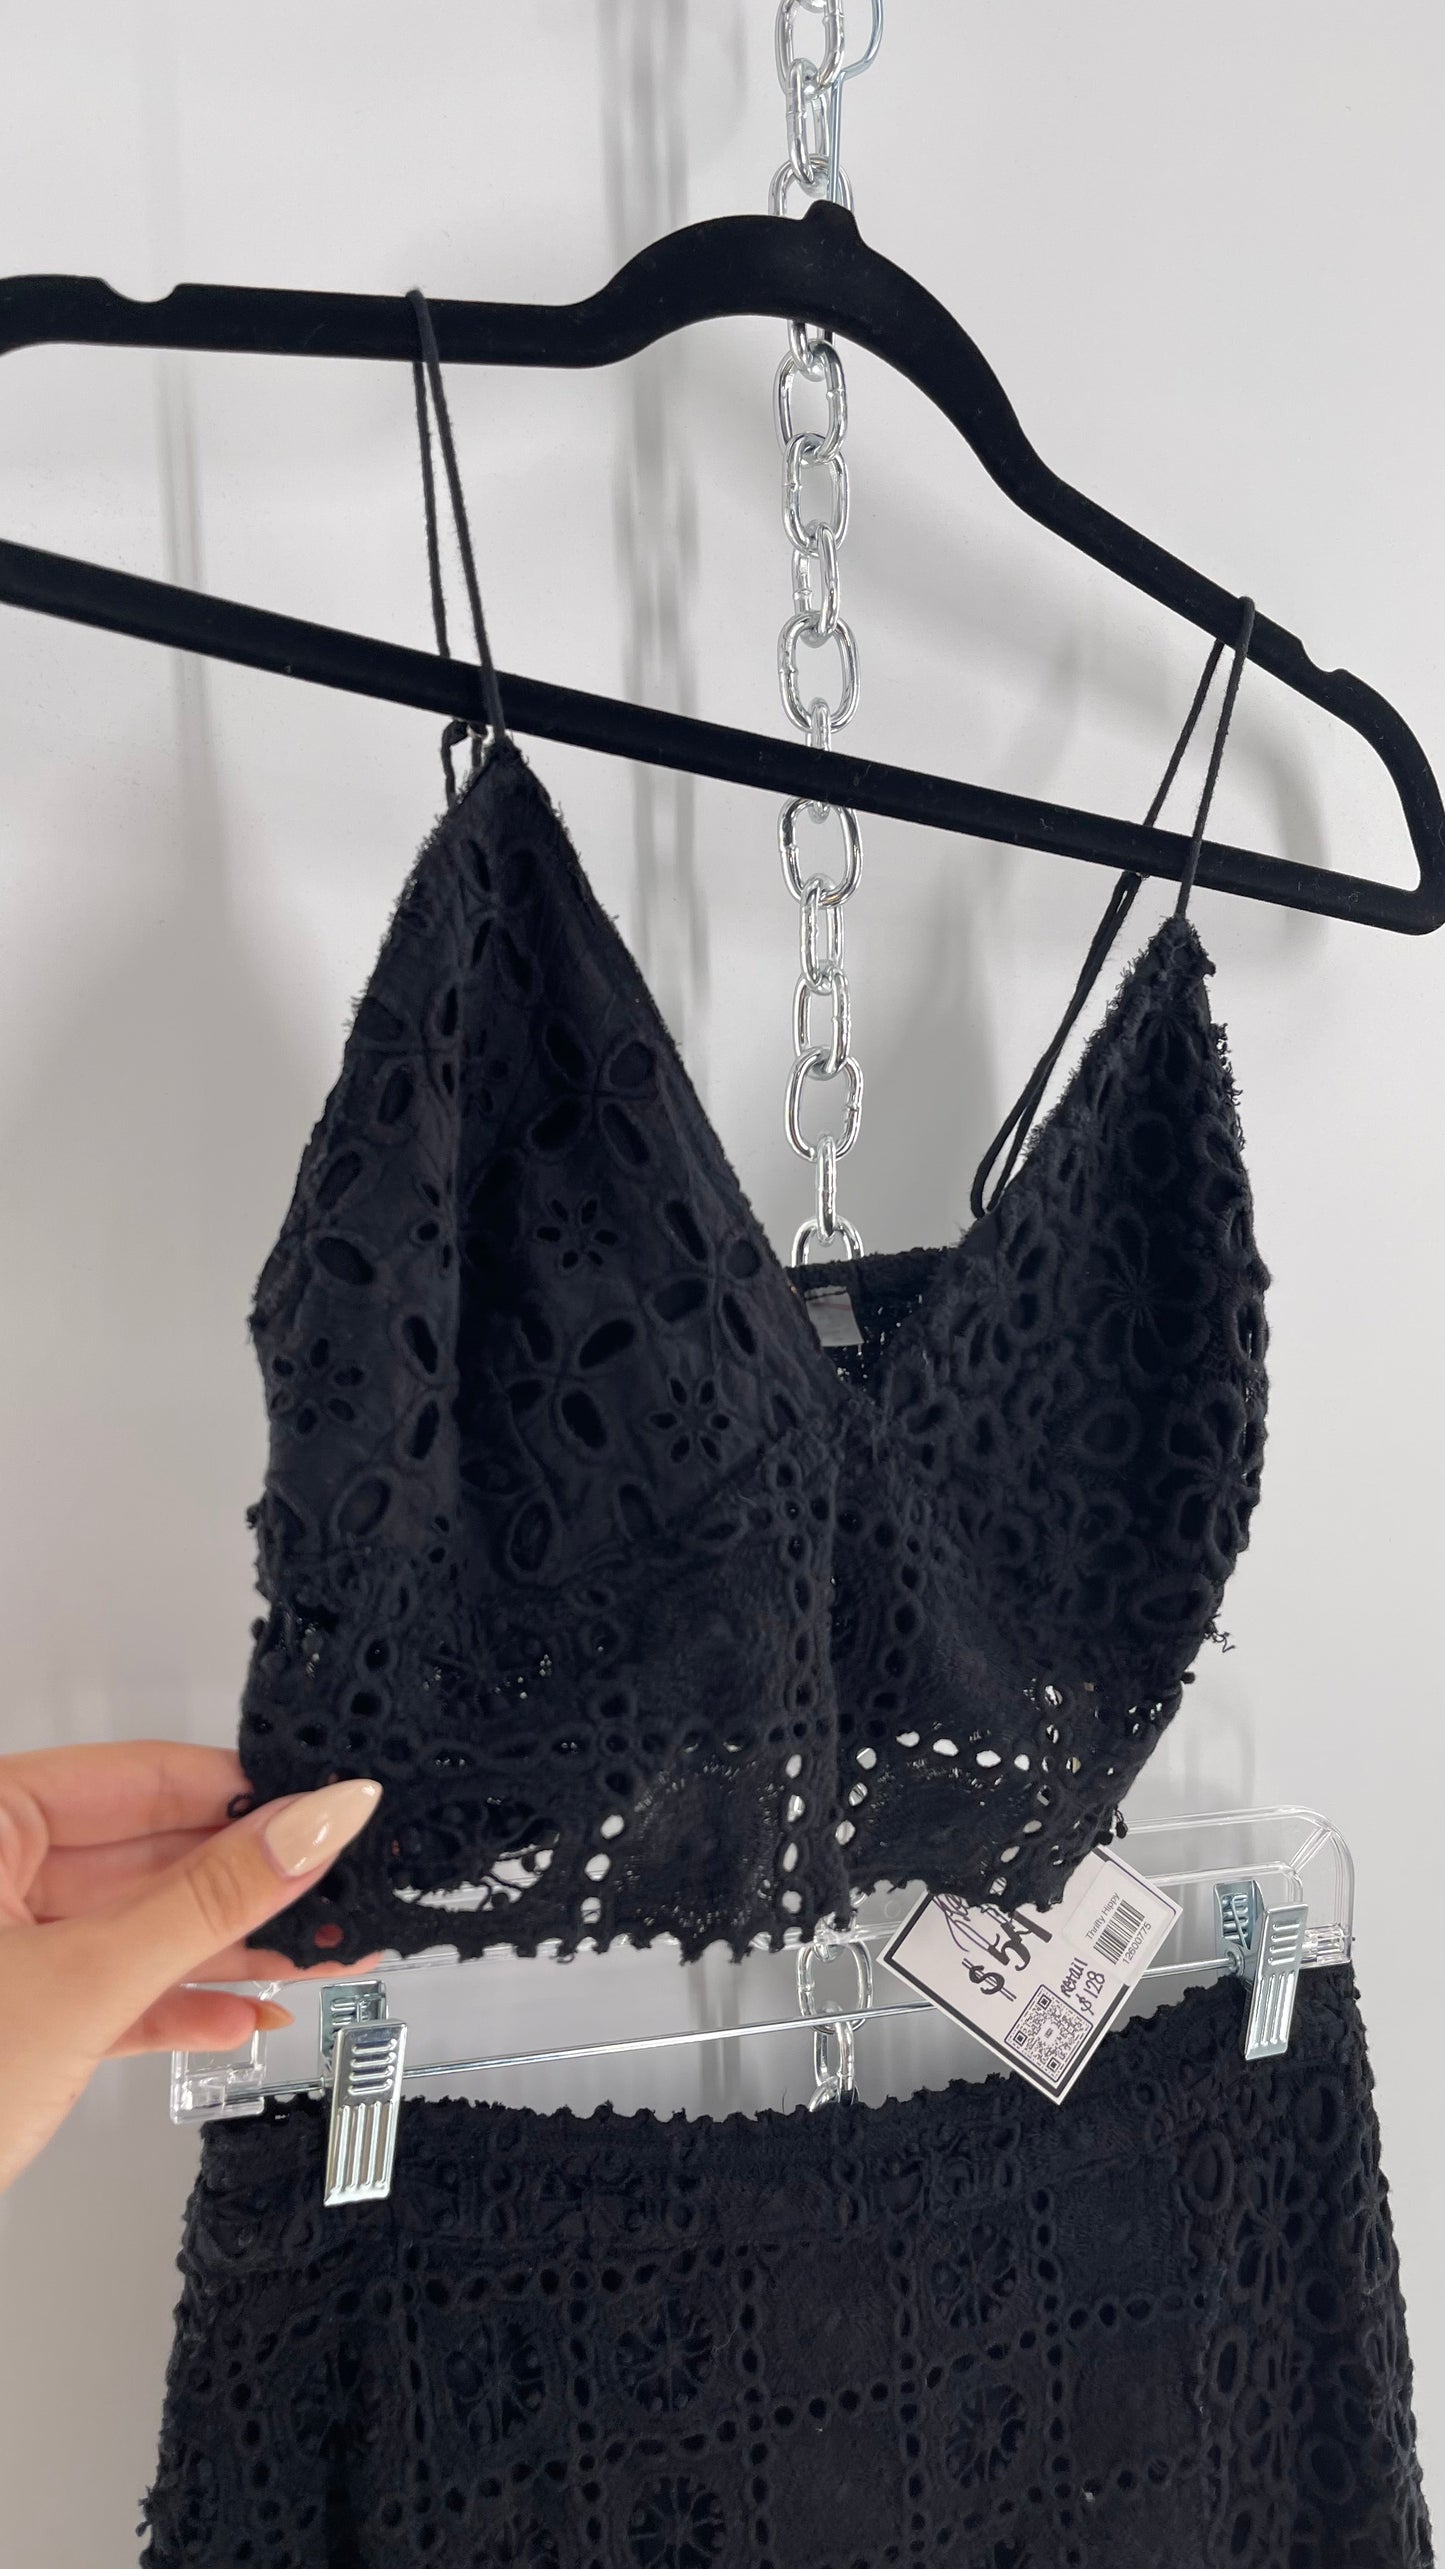 Free People Black Eyelet Lace Mini Skirt and Bustier Set (6)